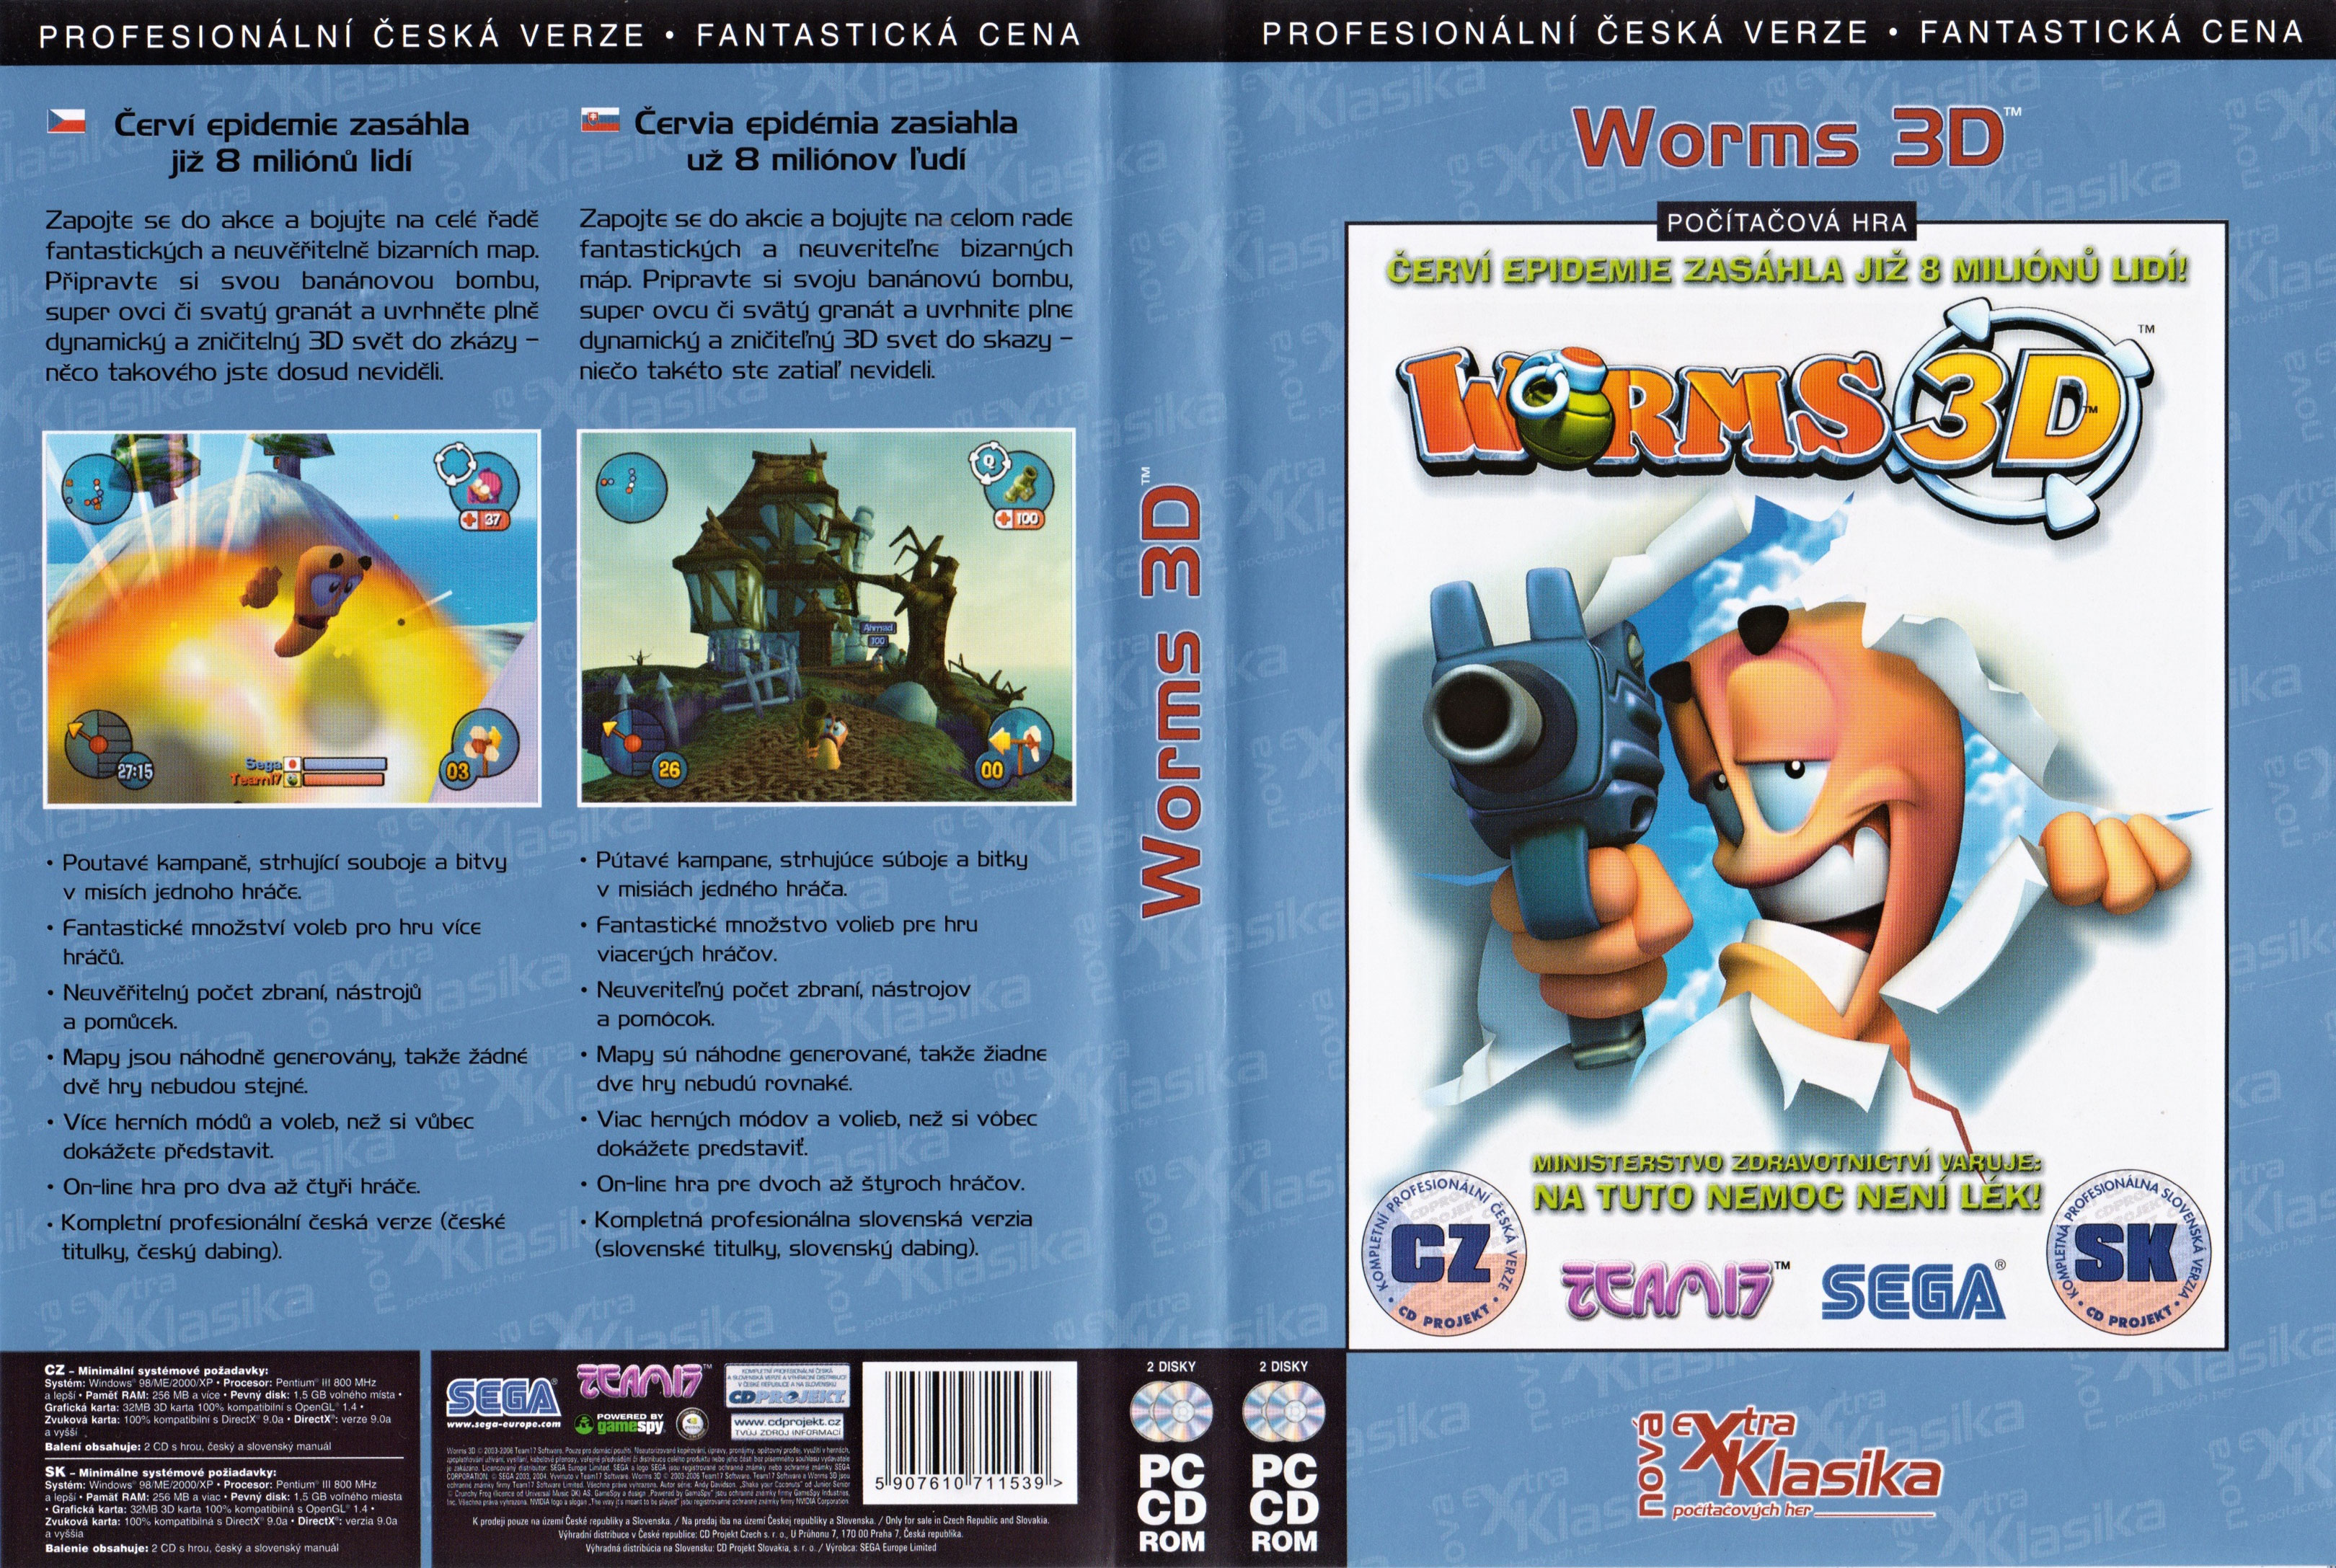 Worms 3D - DVD obal 2